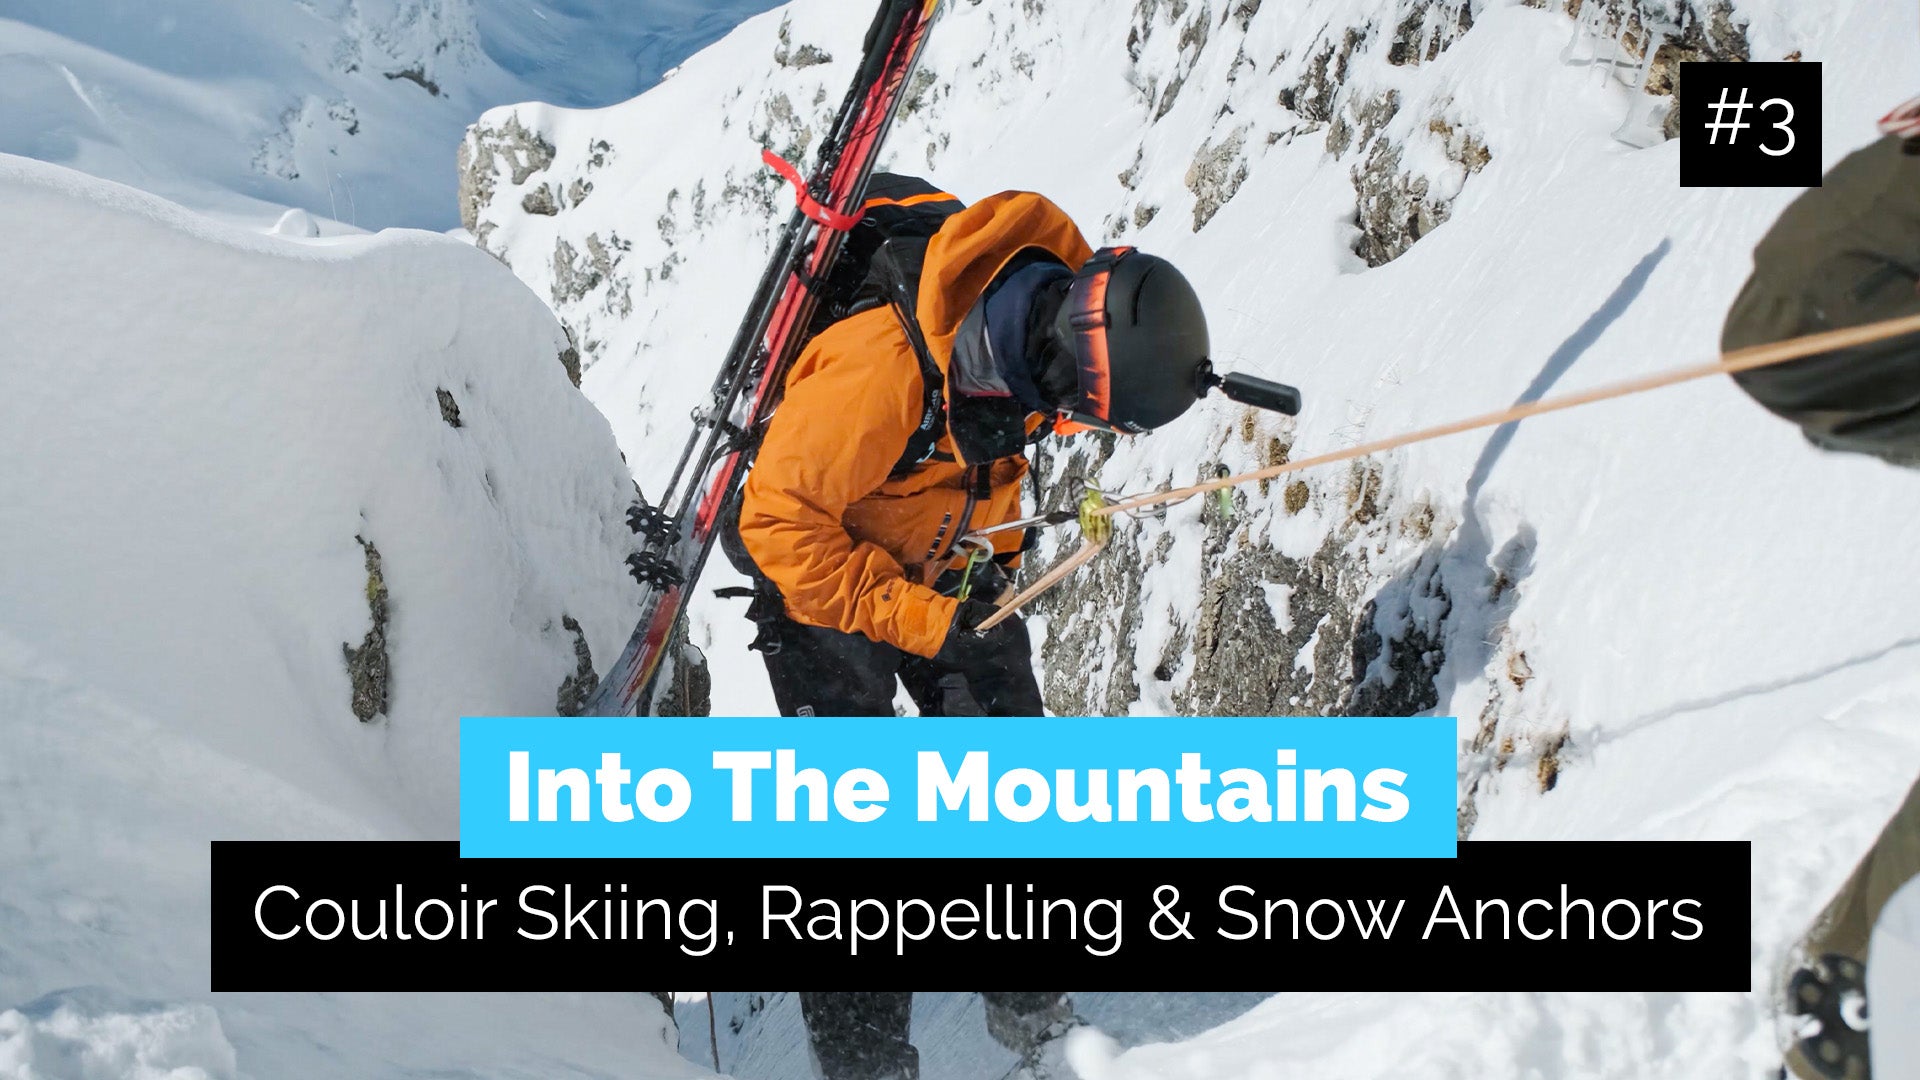 Couloir Skiing & Learning How to Rappel, Build Snow Anchors & Do Ski Cuts | Into the Mountains 3